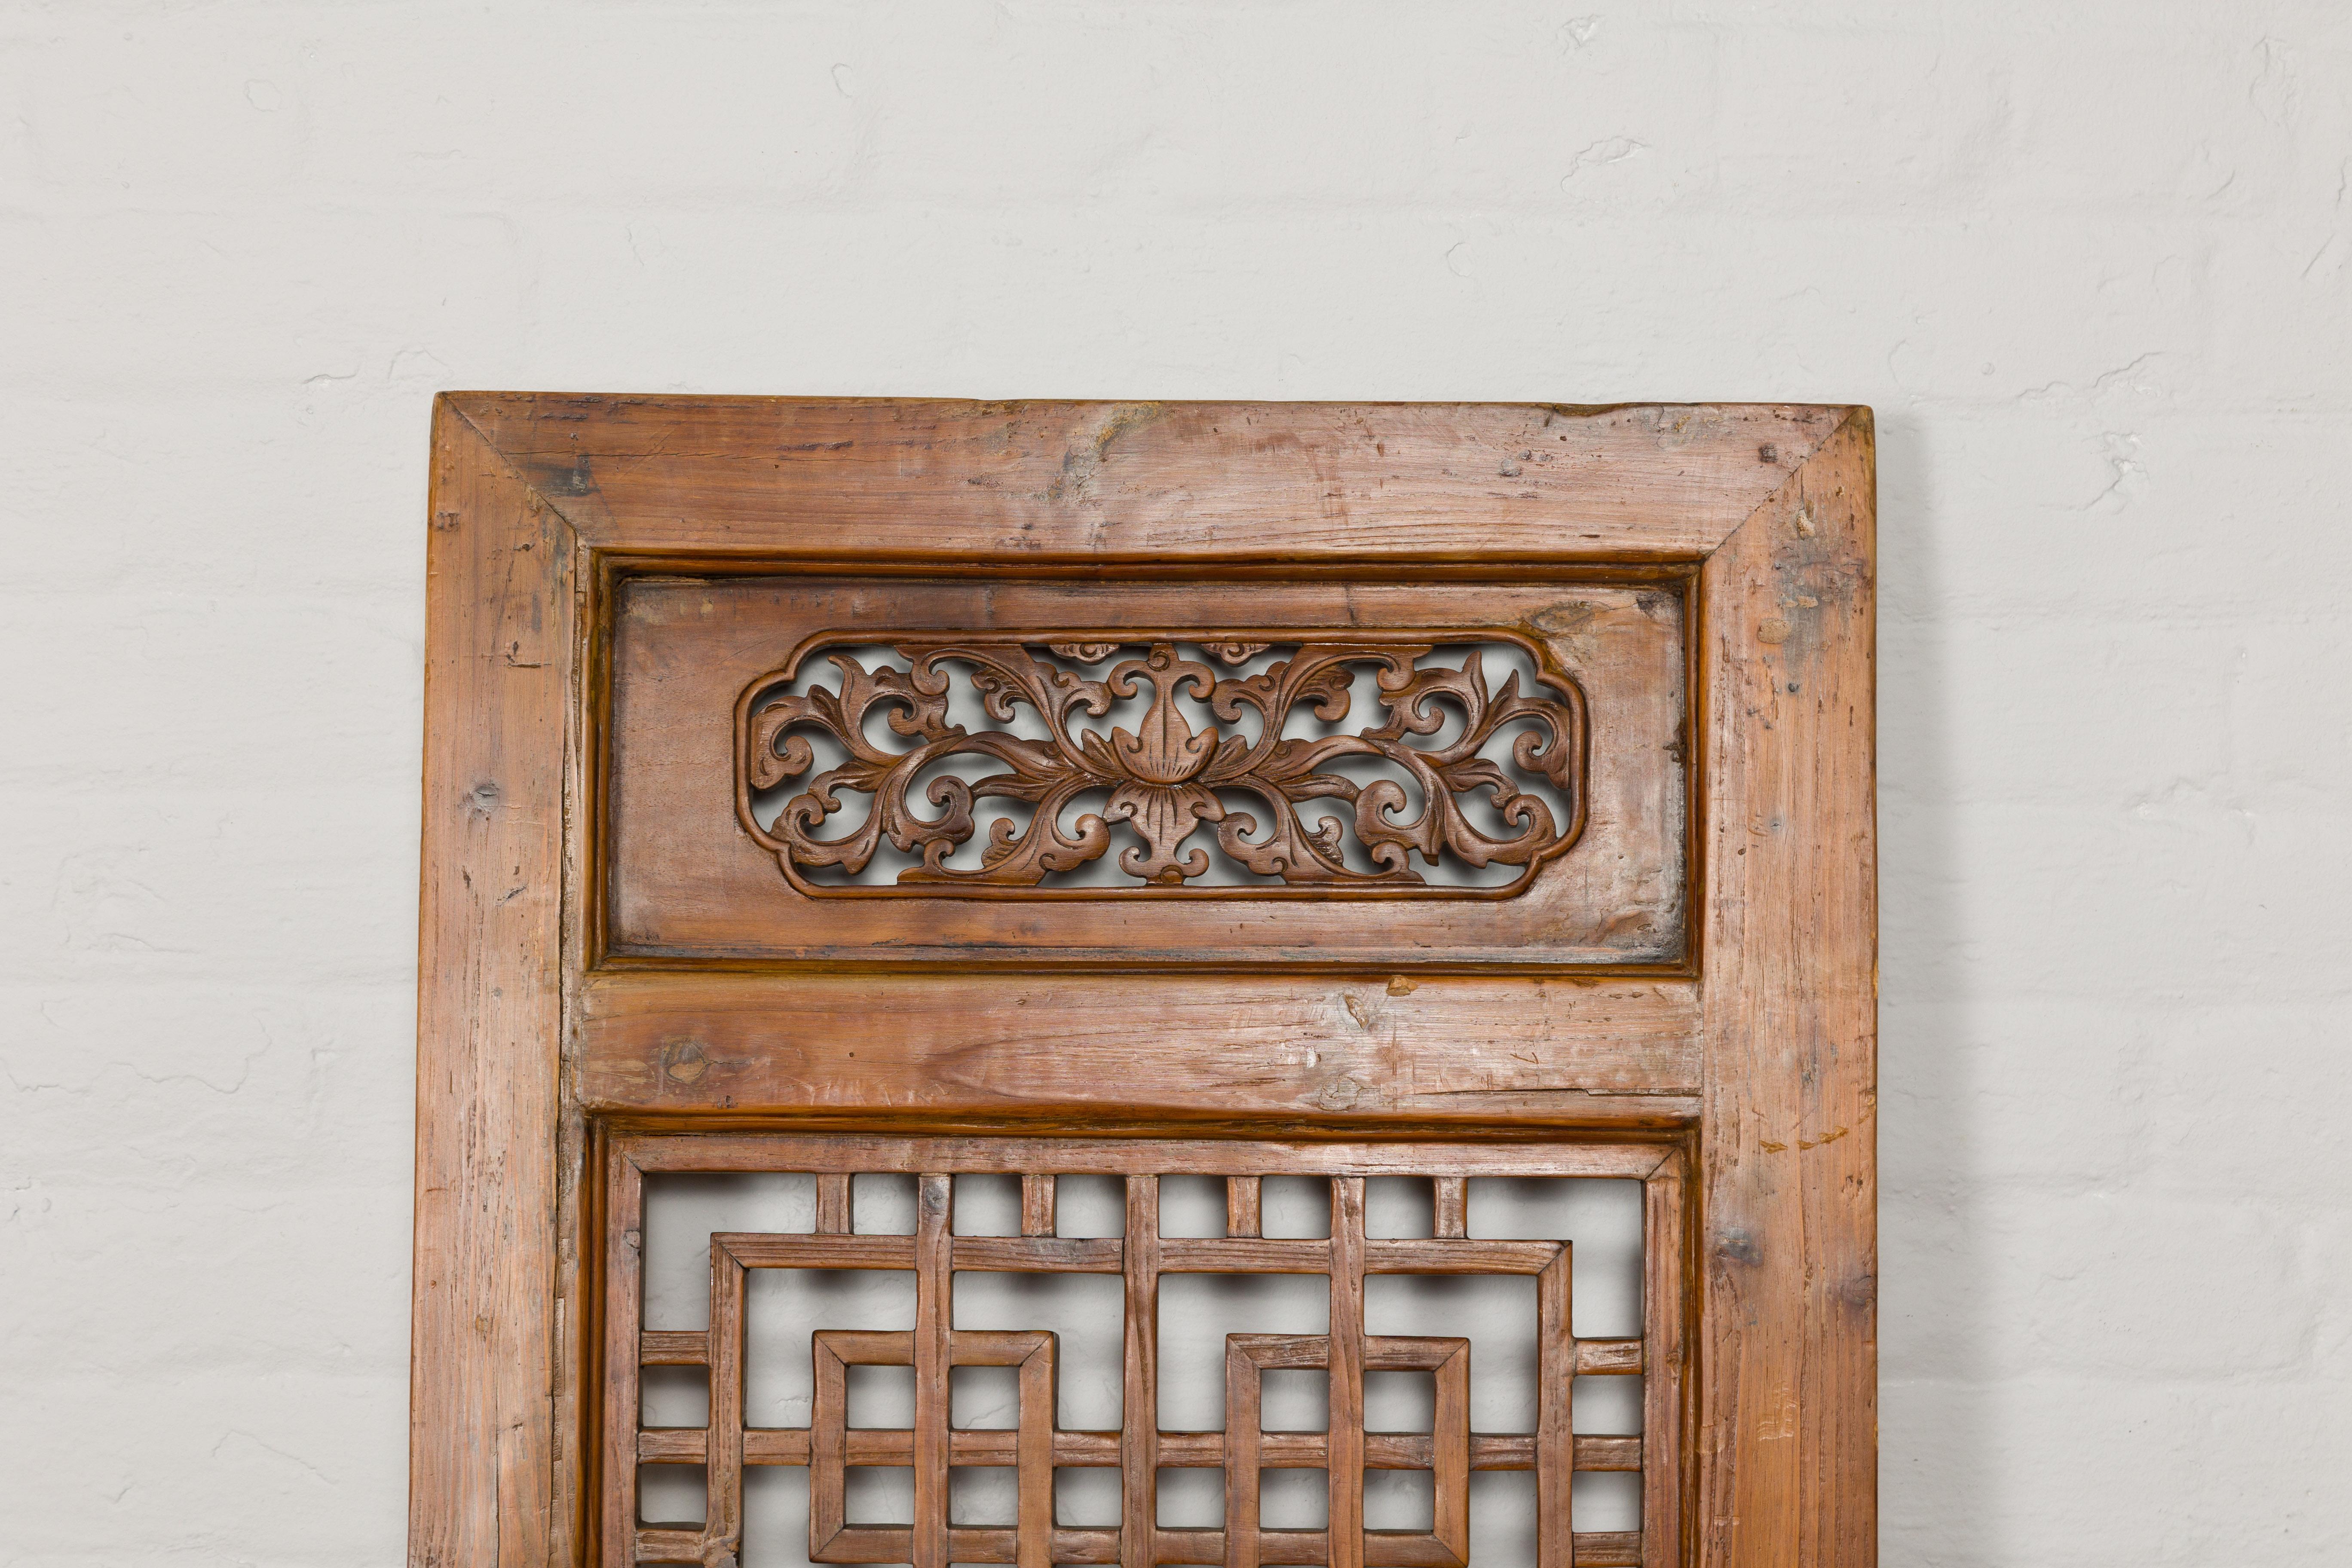 Chinese Qing Dynasty 19th Century Fretwork Screen with Carved Scrolling Motifs For Sale 15